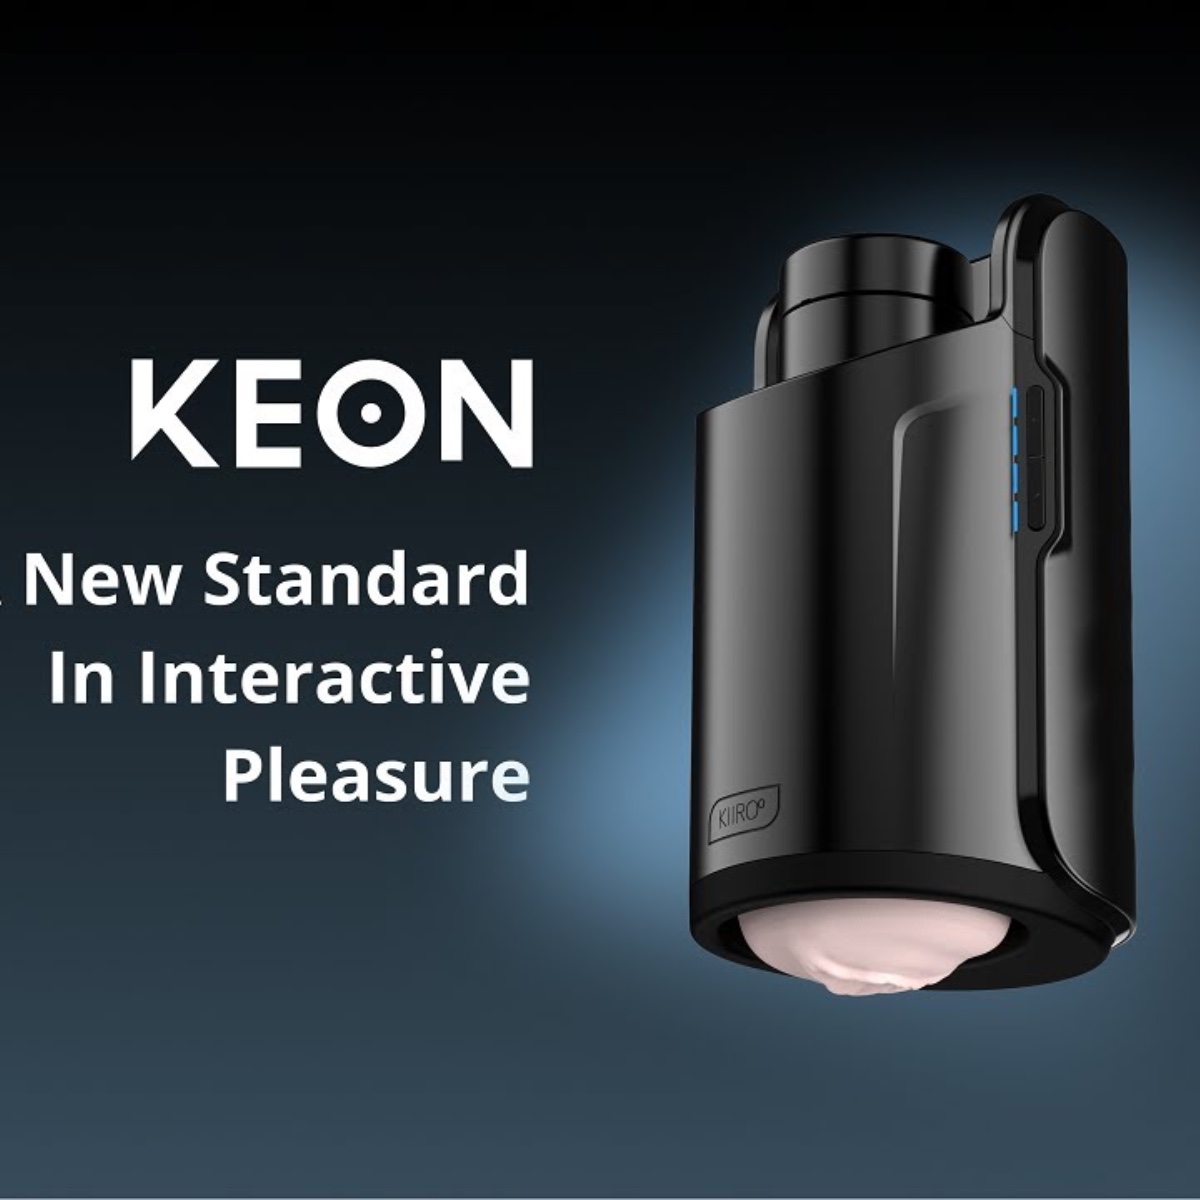 The Evolution of Kiiroo Keon: From Concept to Innovation